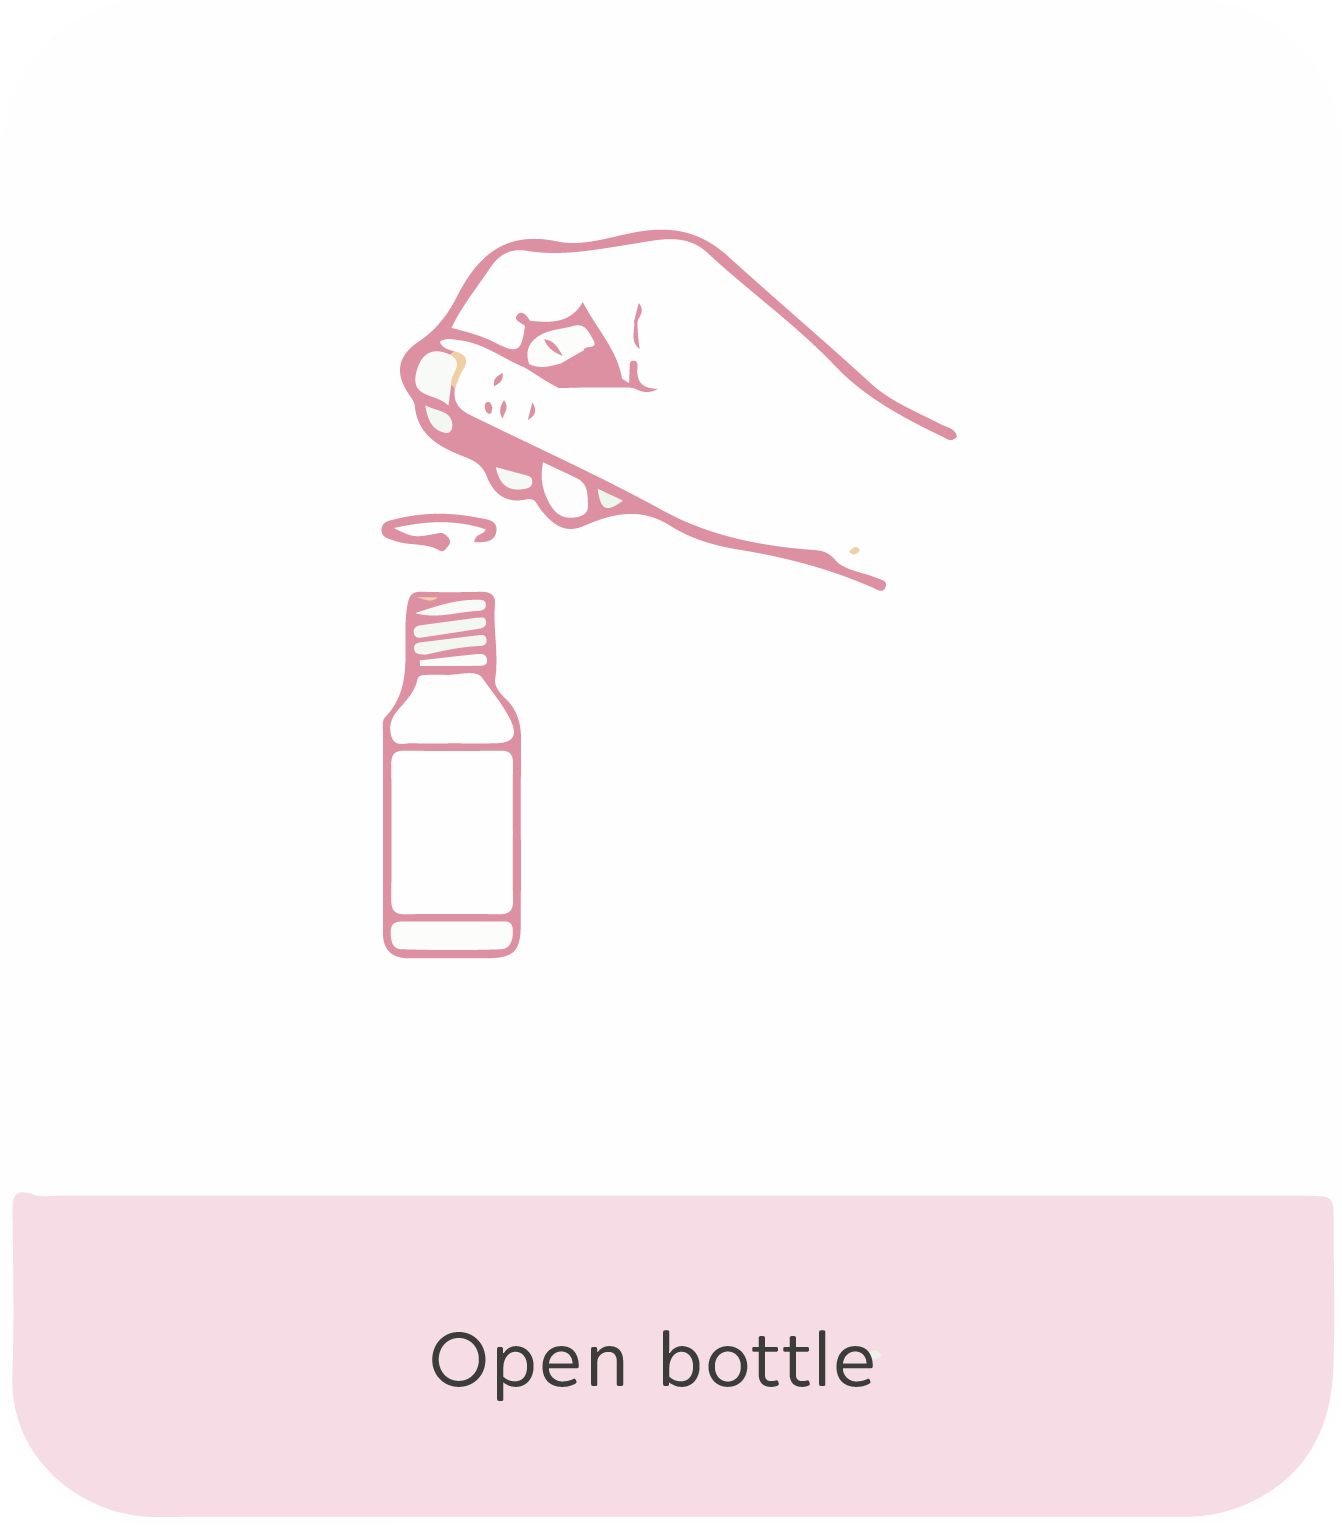 How to use product - First step: Open Bottle